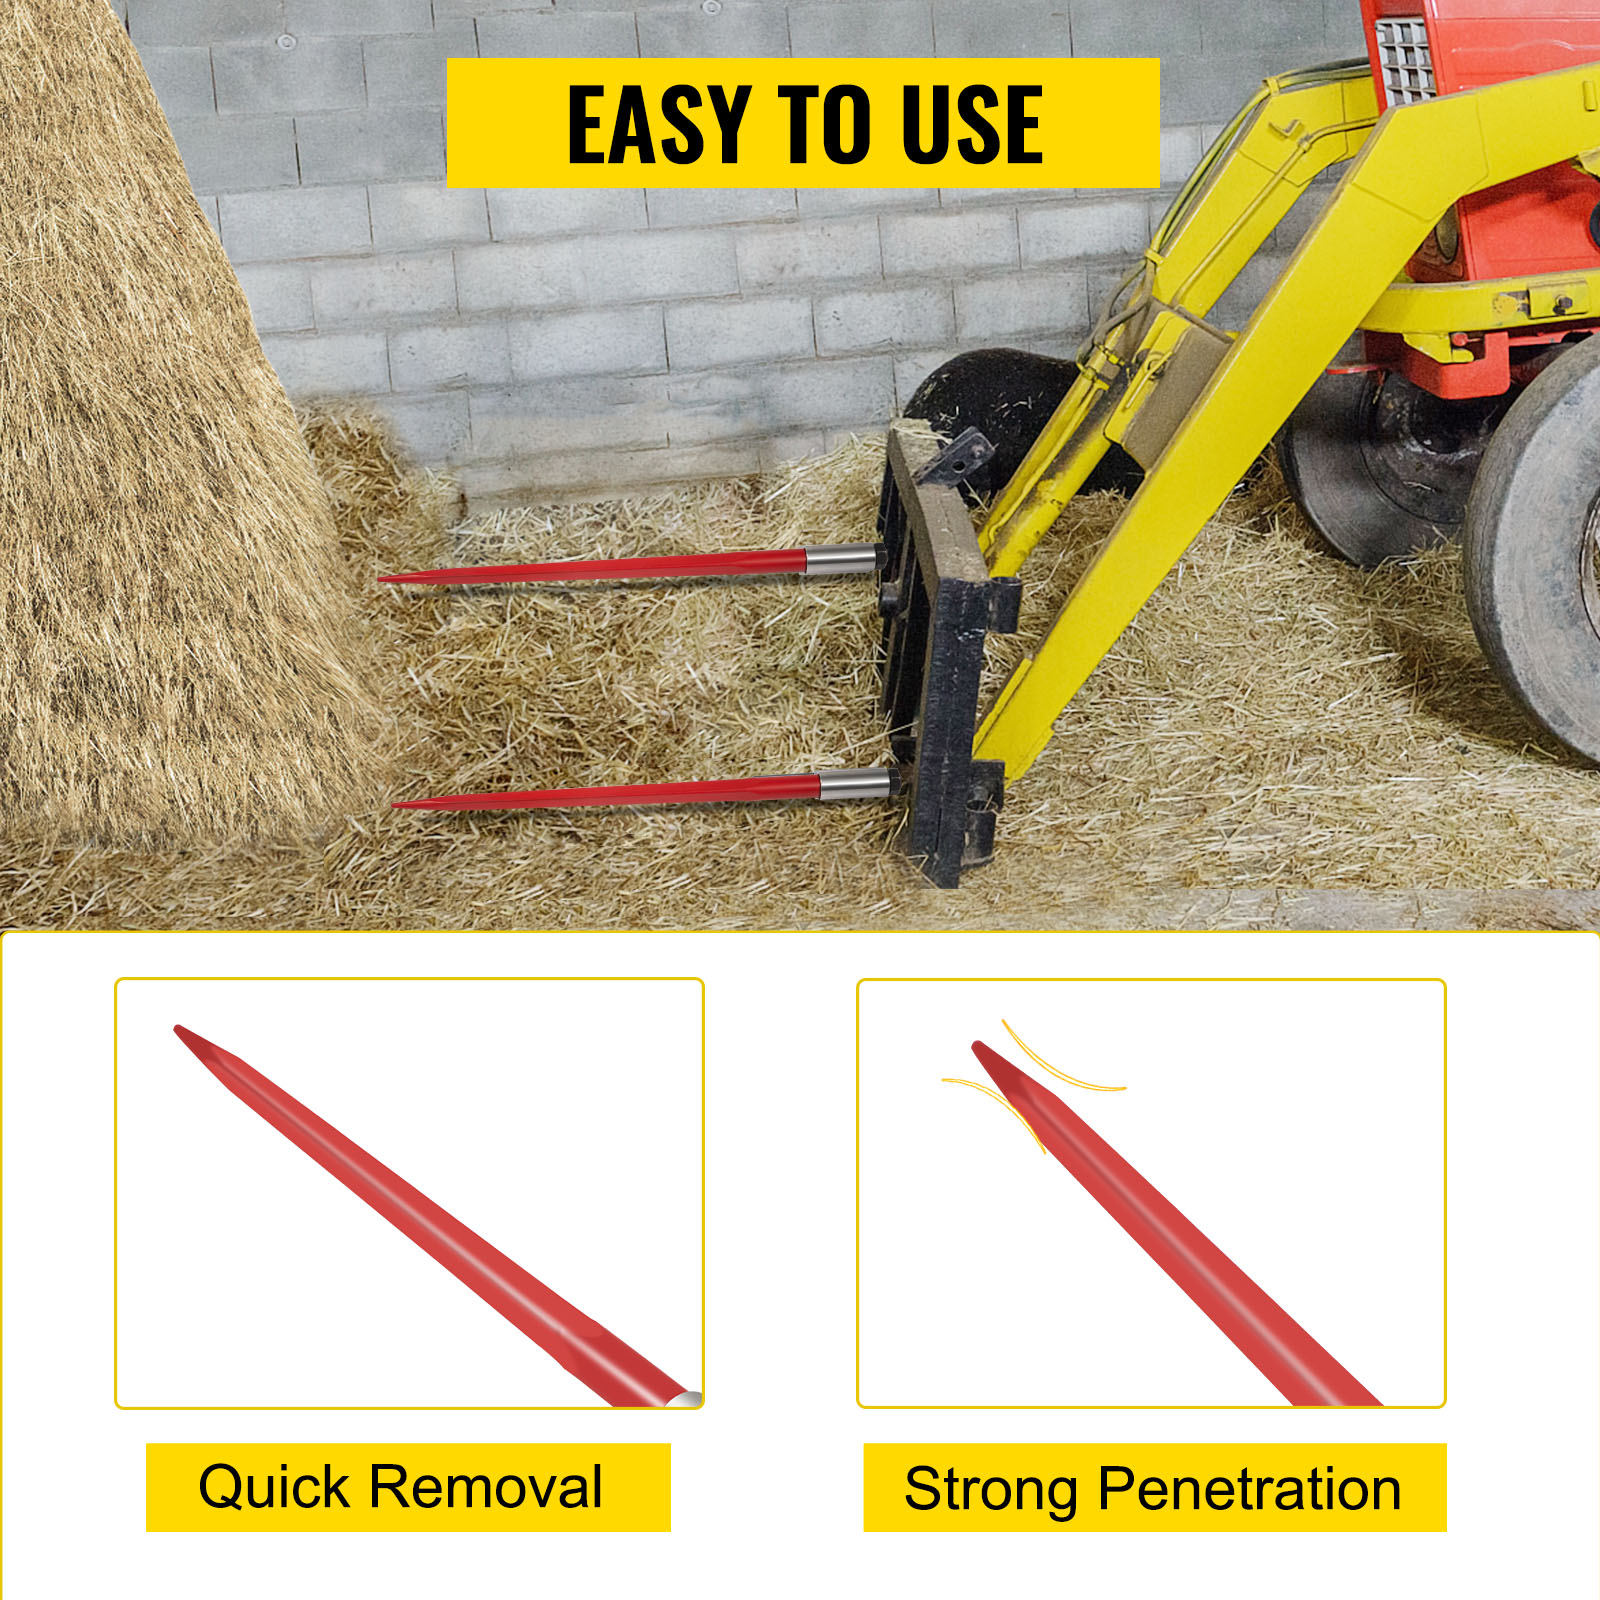 Tractor Bale Spear - Series 2